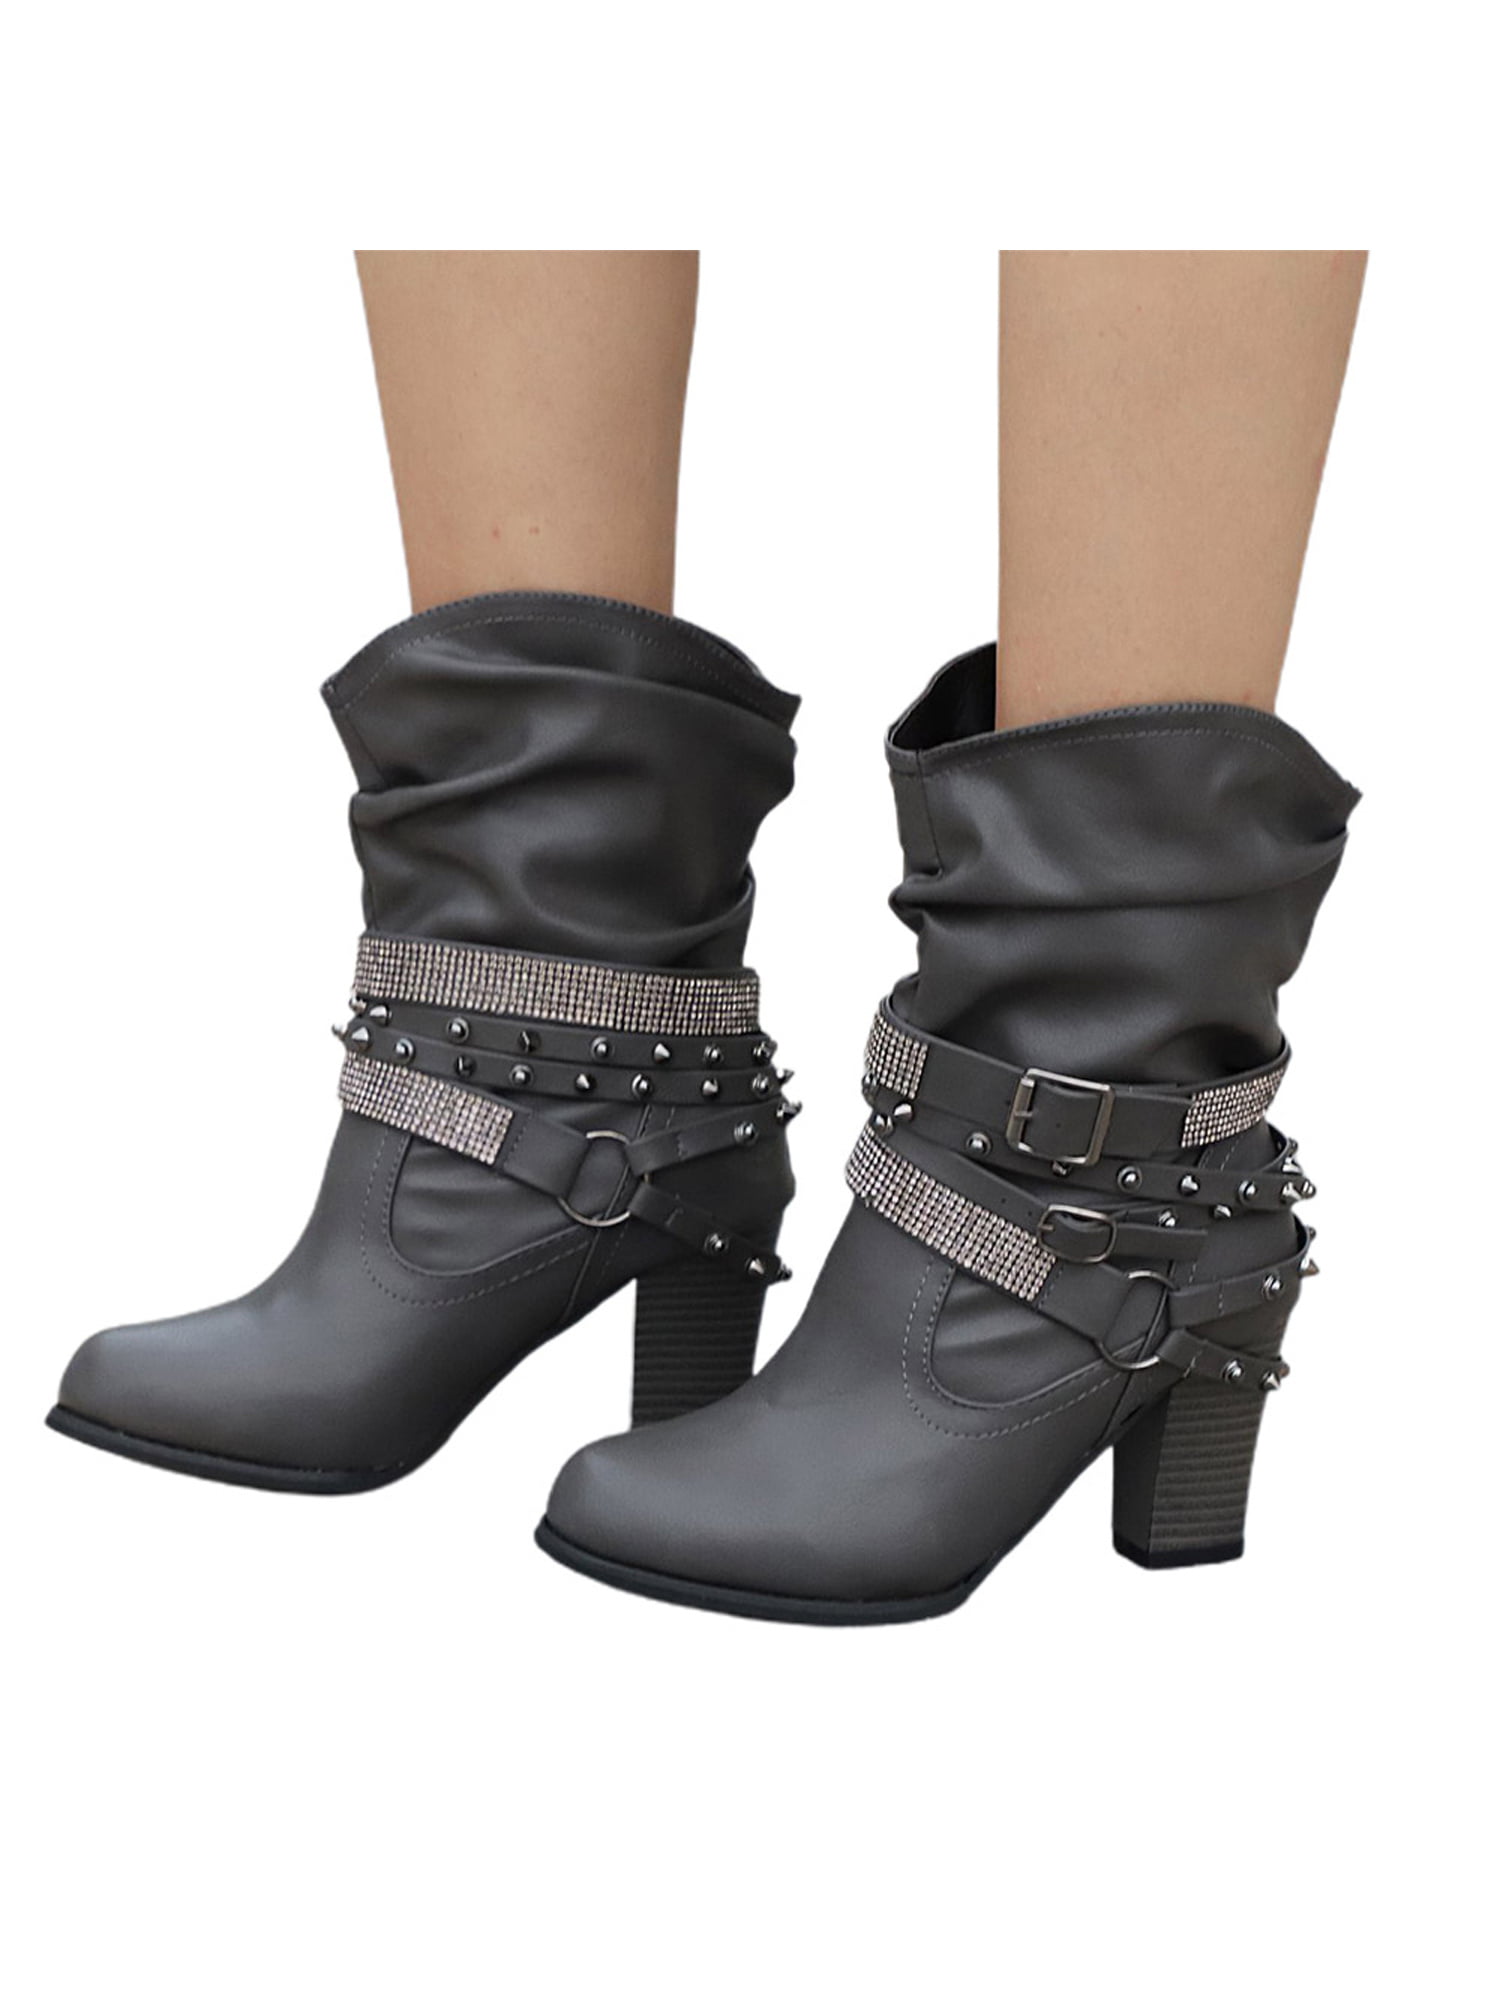 Ladies Leather Buckle Knee High Boots Thick Heels Rhinestone Rivet Slip-On Shoes